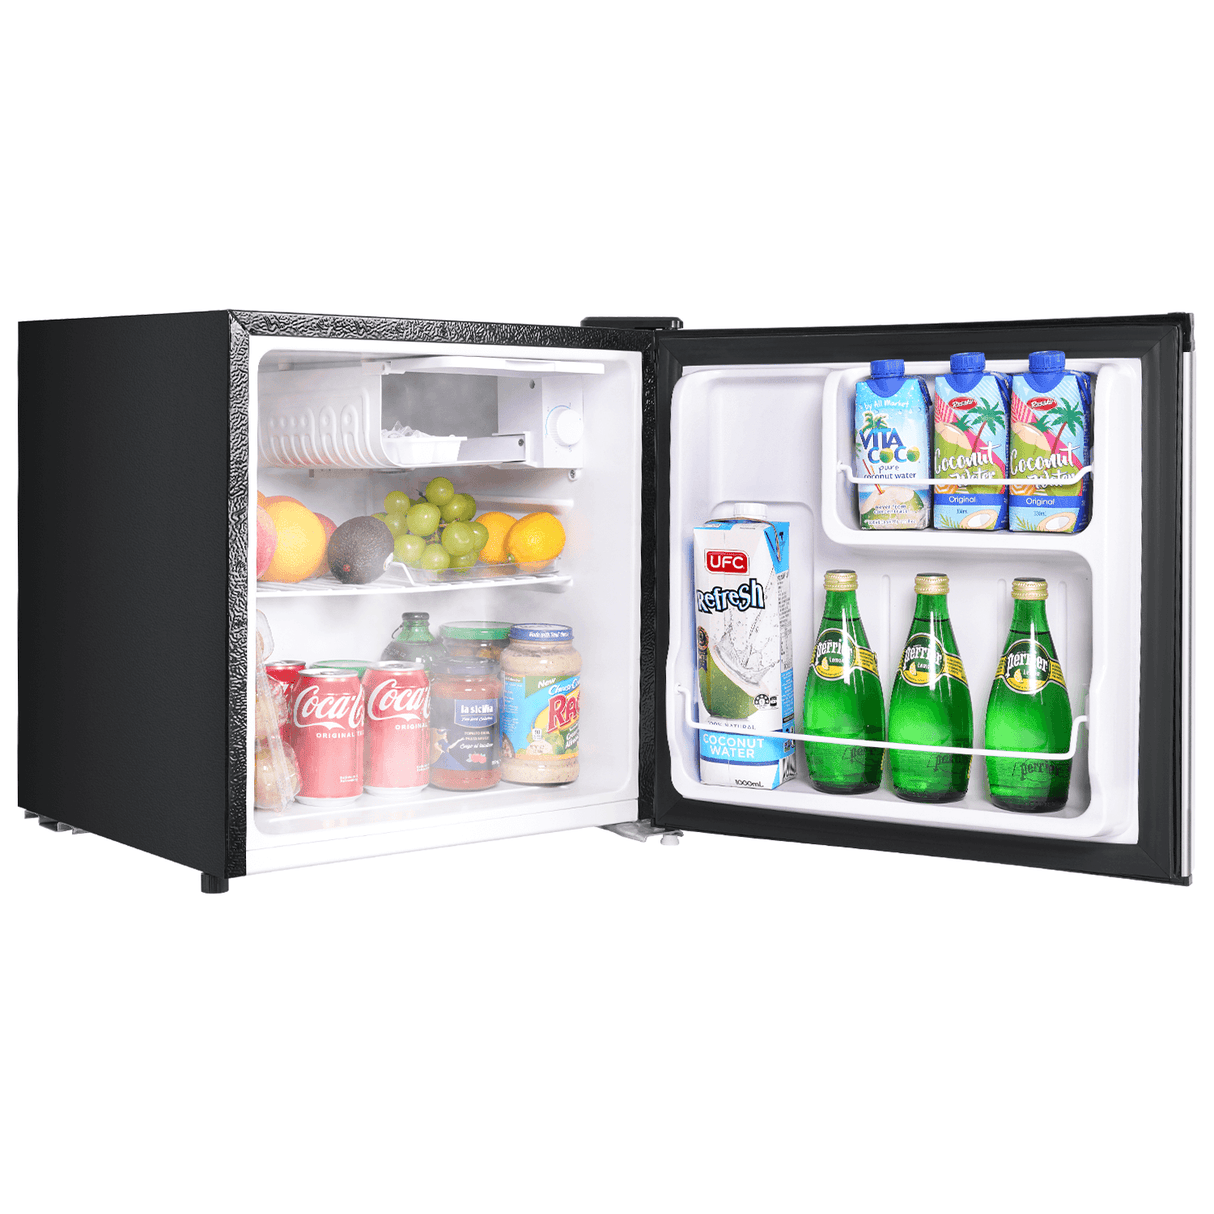 Upstreman 3.2 Cu.Ft Mini Fridge with Freezer, Stainless Steel 2 Door, Adjustable Thermostat, Low Noise, Energy-Efficient, Compact Refrigerator for